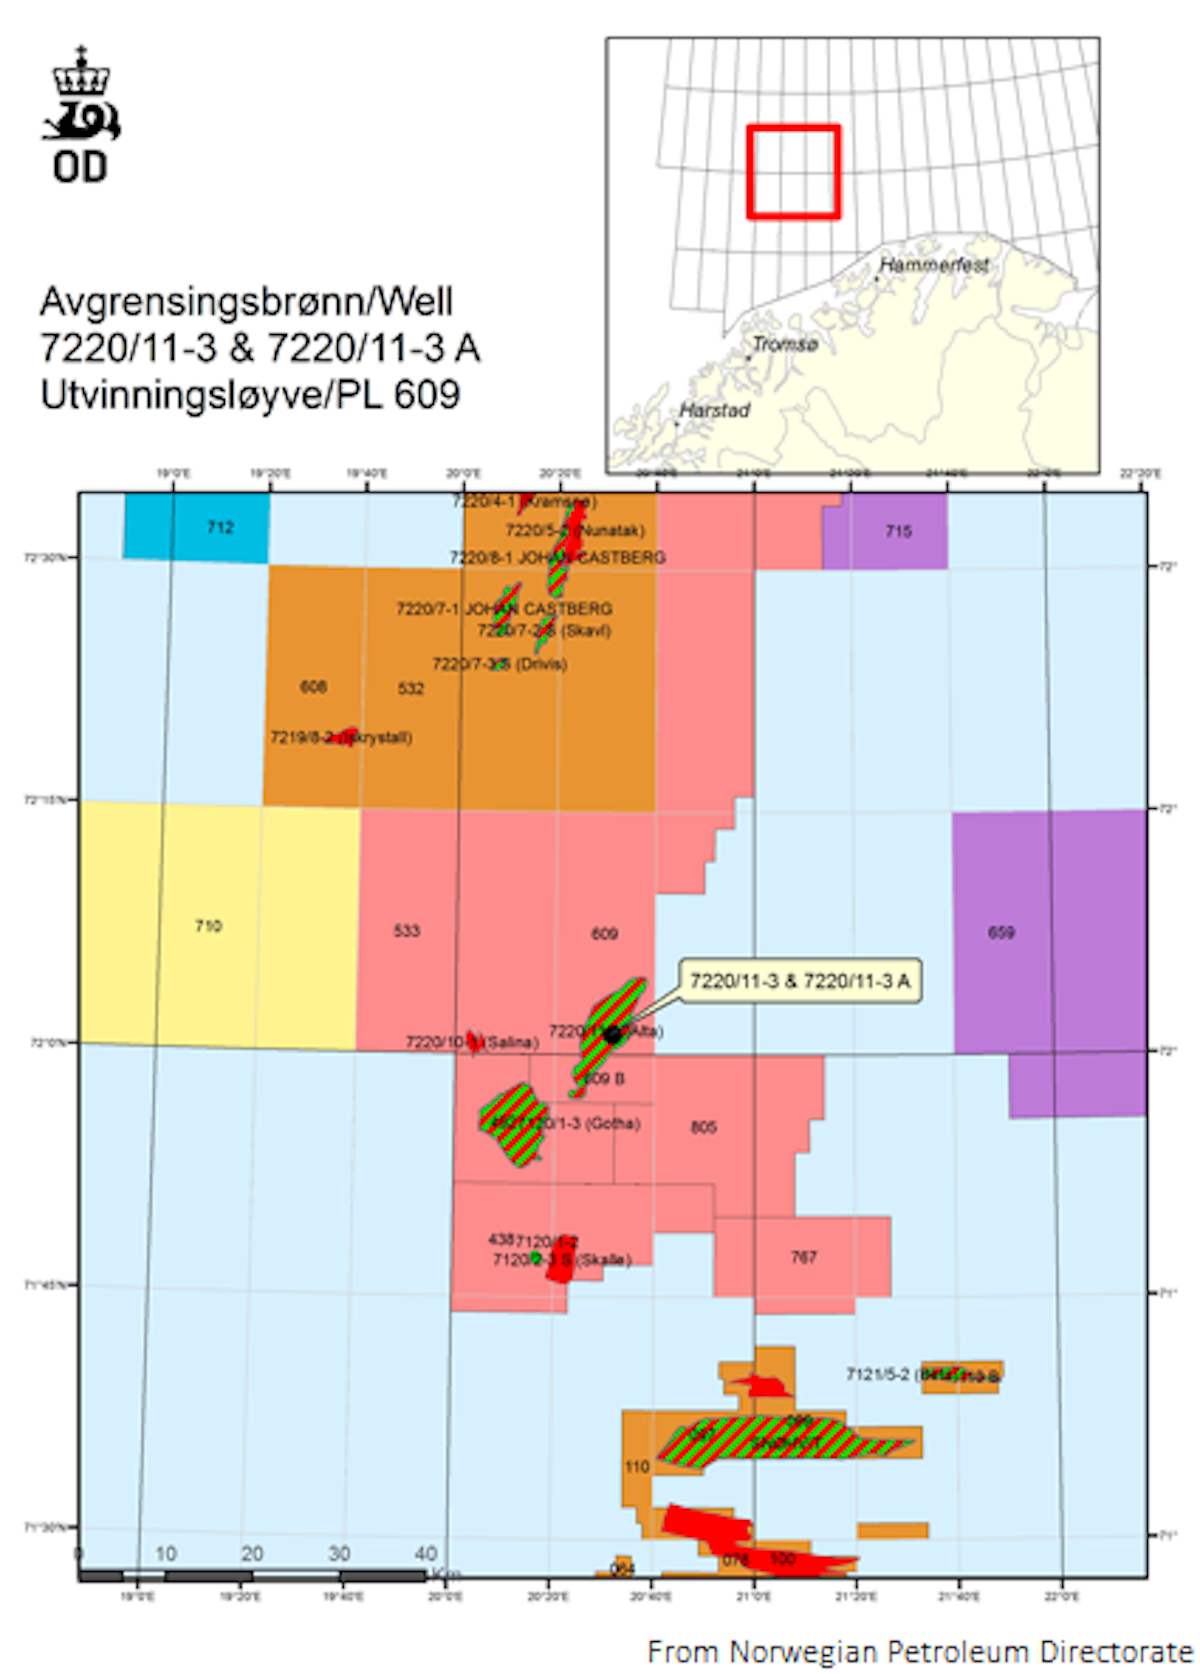 Appraisal wells indicate communication with Alta discovery | Oil & Gas ...